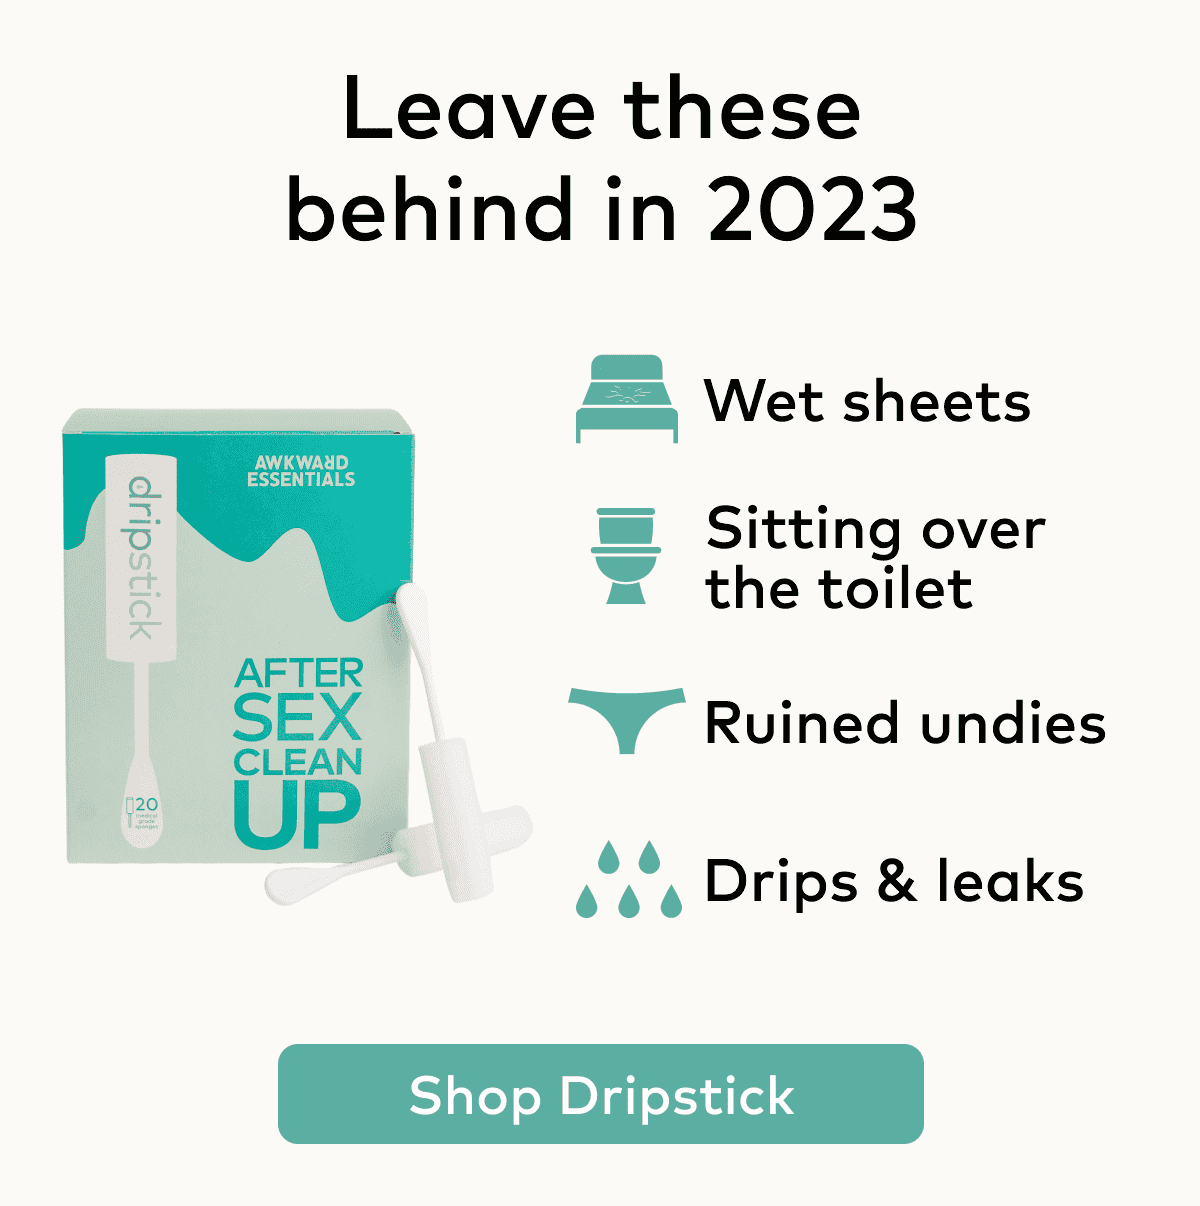 Leave these behind in 2023 and shop Dripstick